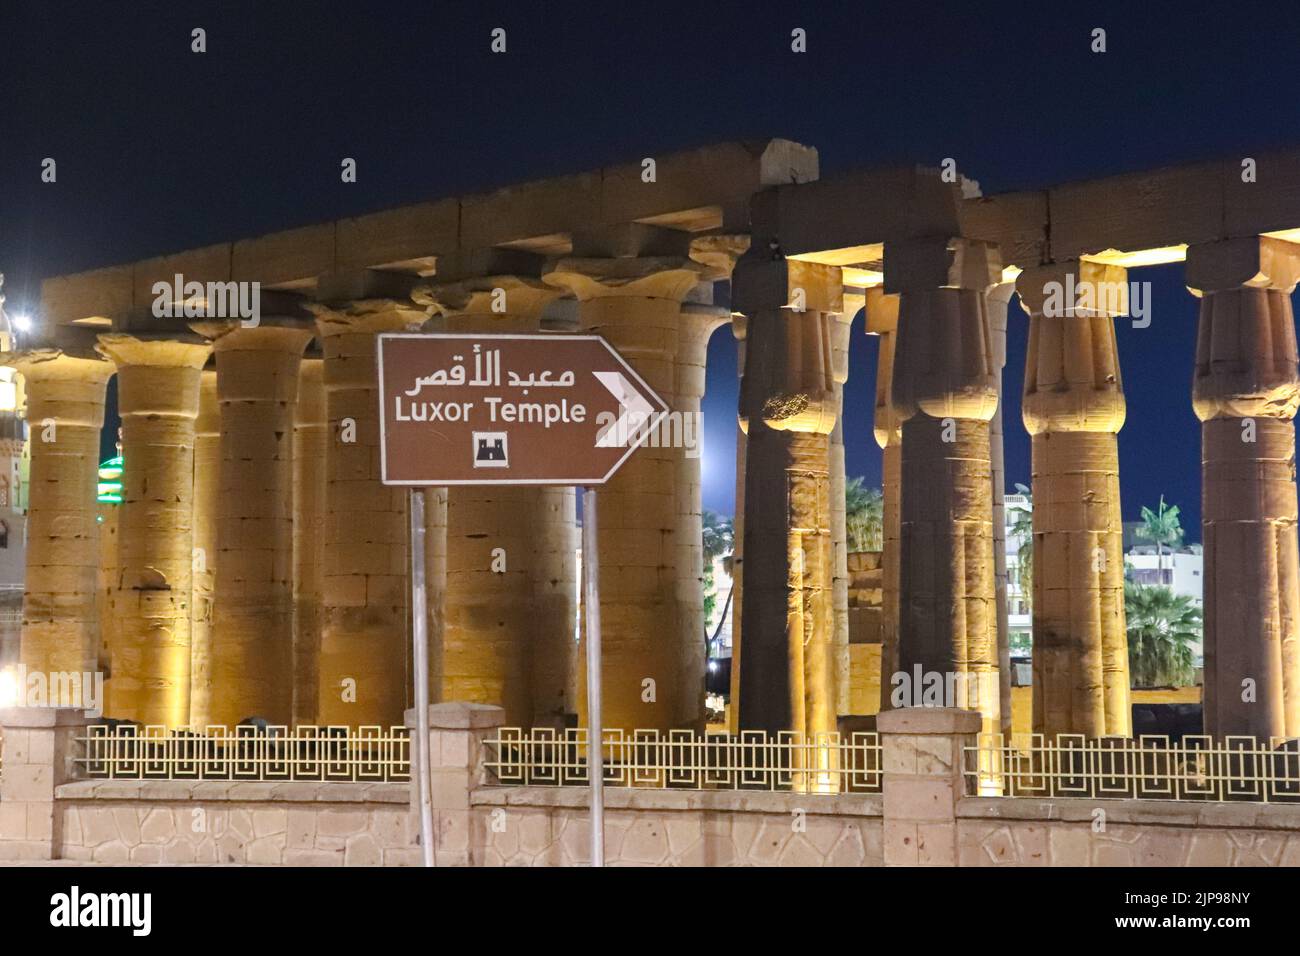 Luxor temple at night (street sign leading to the temple) Stock Photo